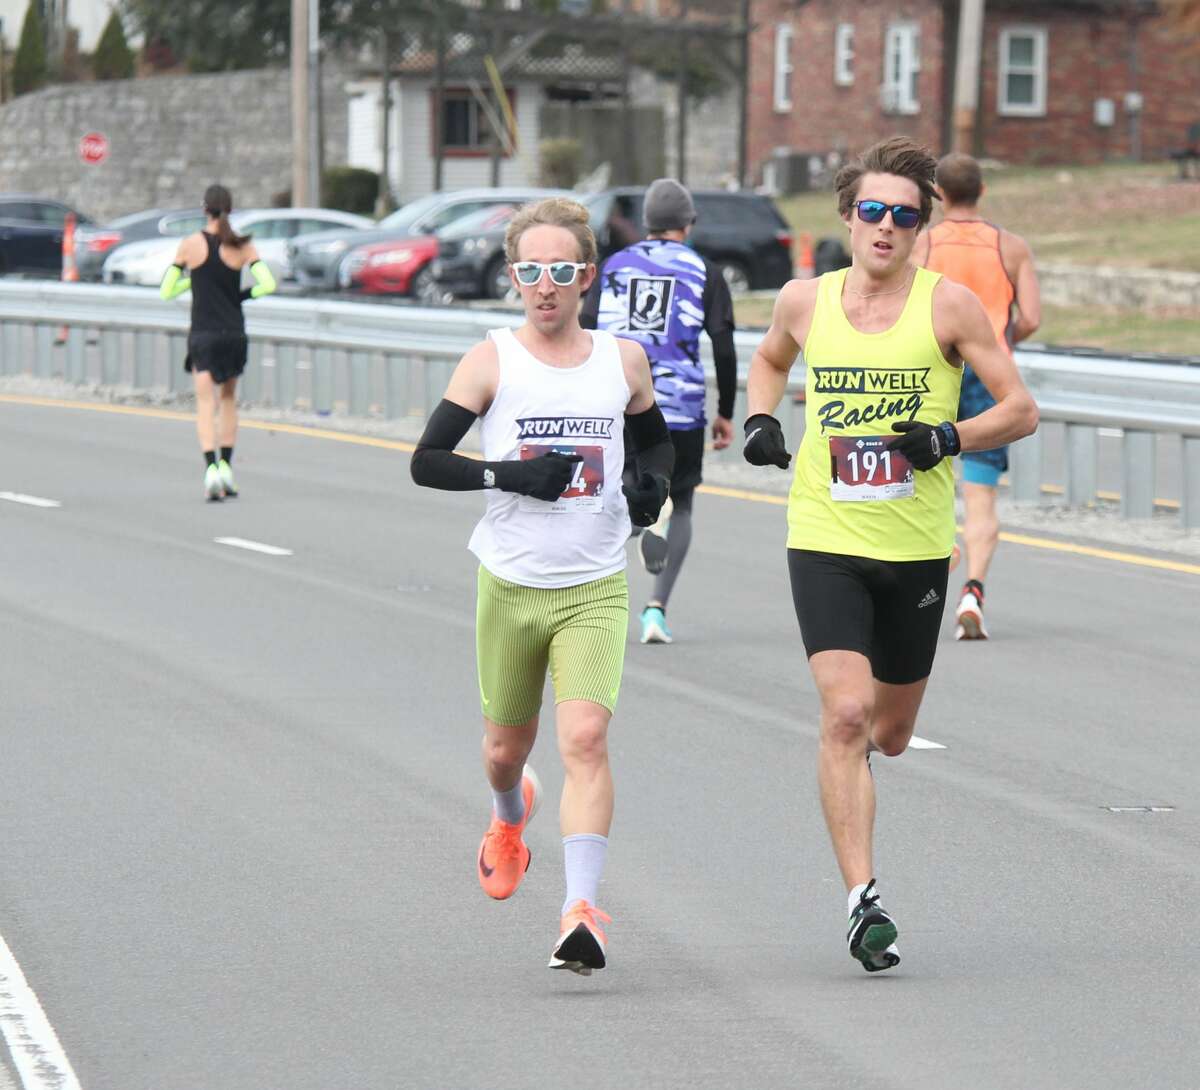 Jake Peal (134) and Luke Padesky (191) lead the pack on the return trip during the annual Great River Road Run Saturday. Padesky scored the best time at 54:55.9, with Peal coming in at 55:15.2. Sponsored by the Alton Road Runner's Club, it attracted about 330 participants this year.